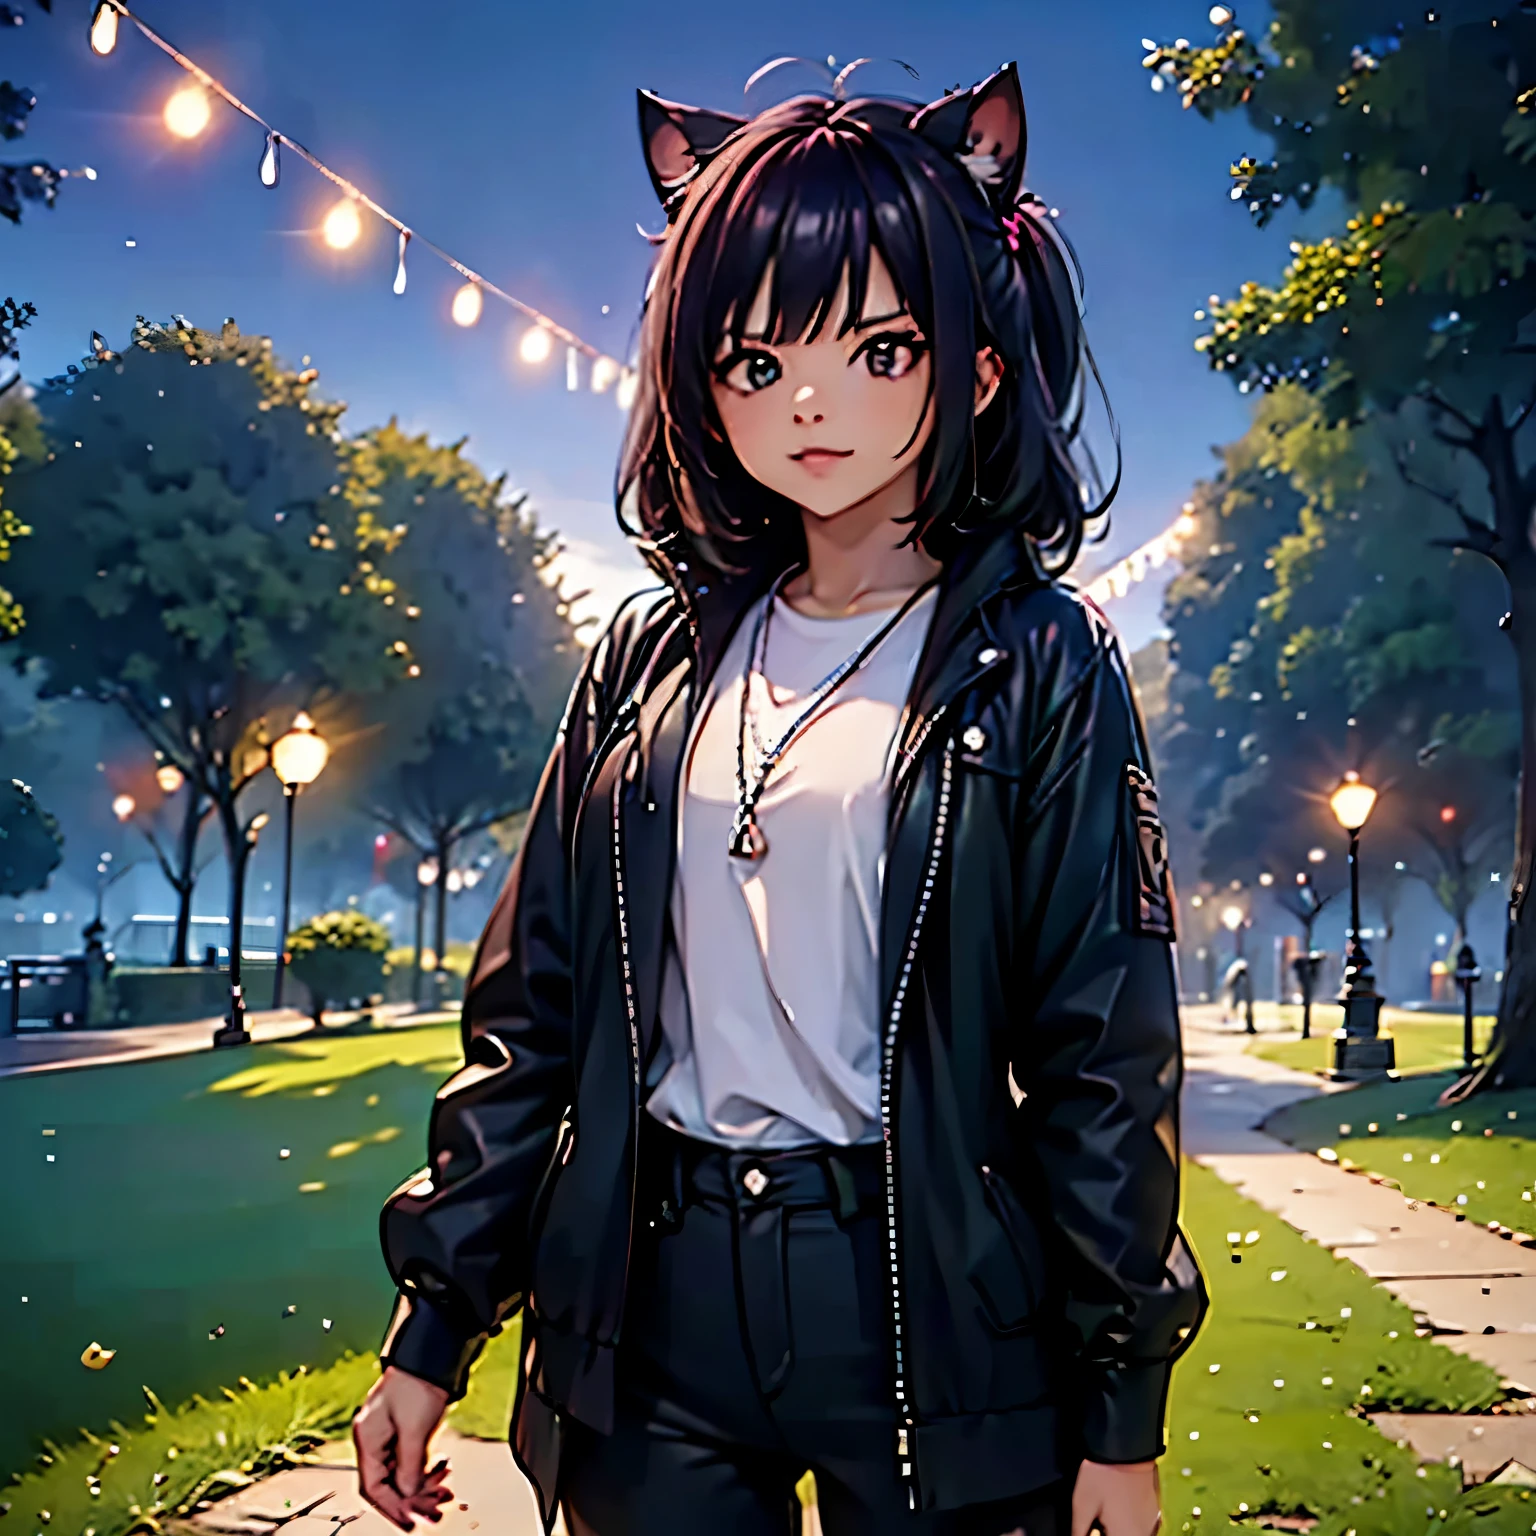 a man with his wife and daughter, Holding hands, casual clothes, walk in an amusement park at night, with the place illuminated, bokeh effect, smiling, full body of the 3, ( only three characters),cast shadow, atmospheric perspective, to flourish, 8k, super detail, necessary, Best Quality, HD, Anatomically correct, textured skin, high quality, high resolution, Best Quality
